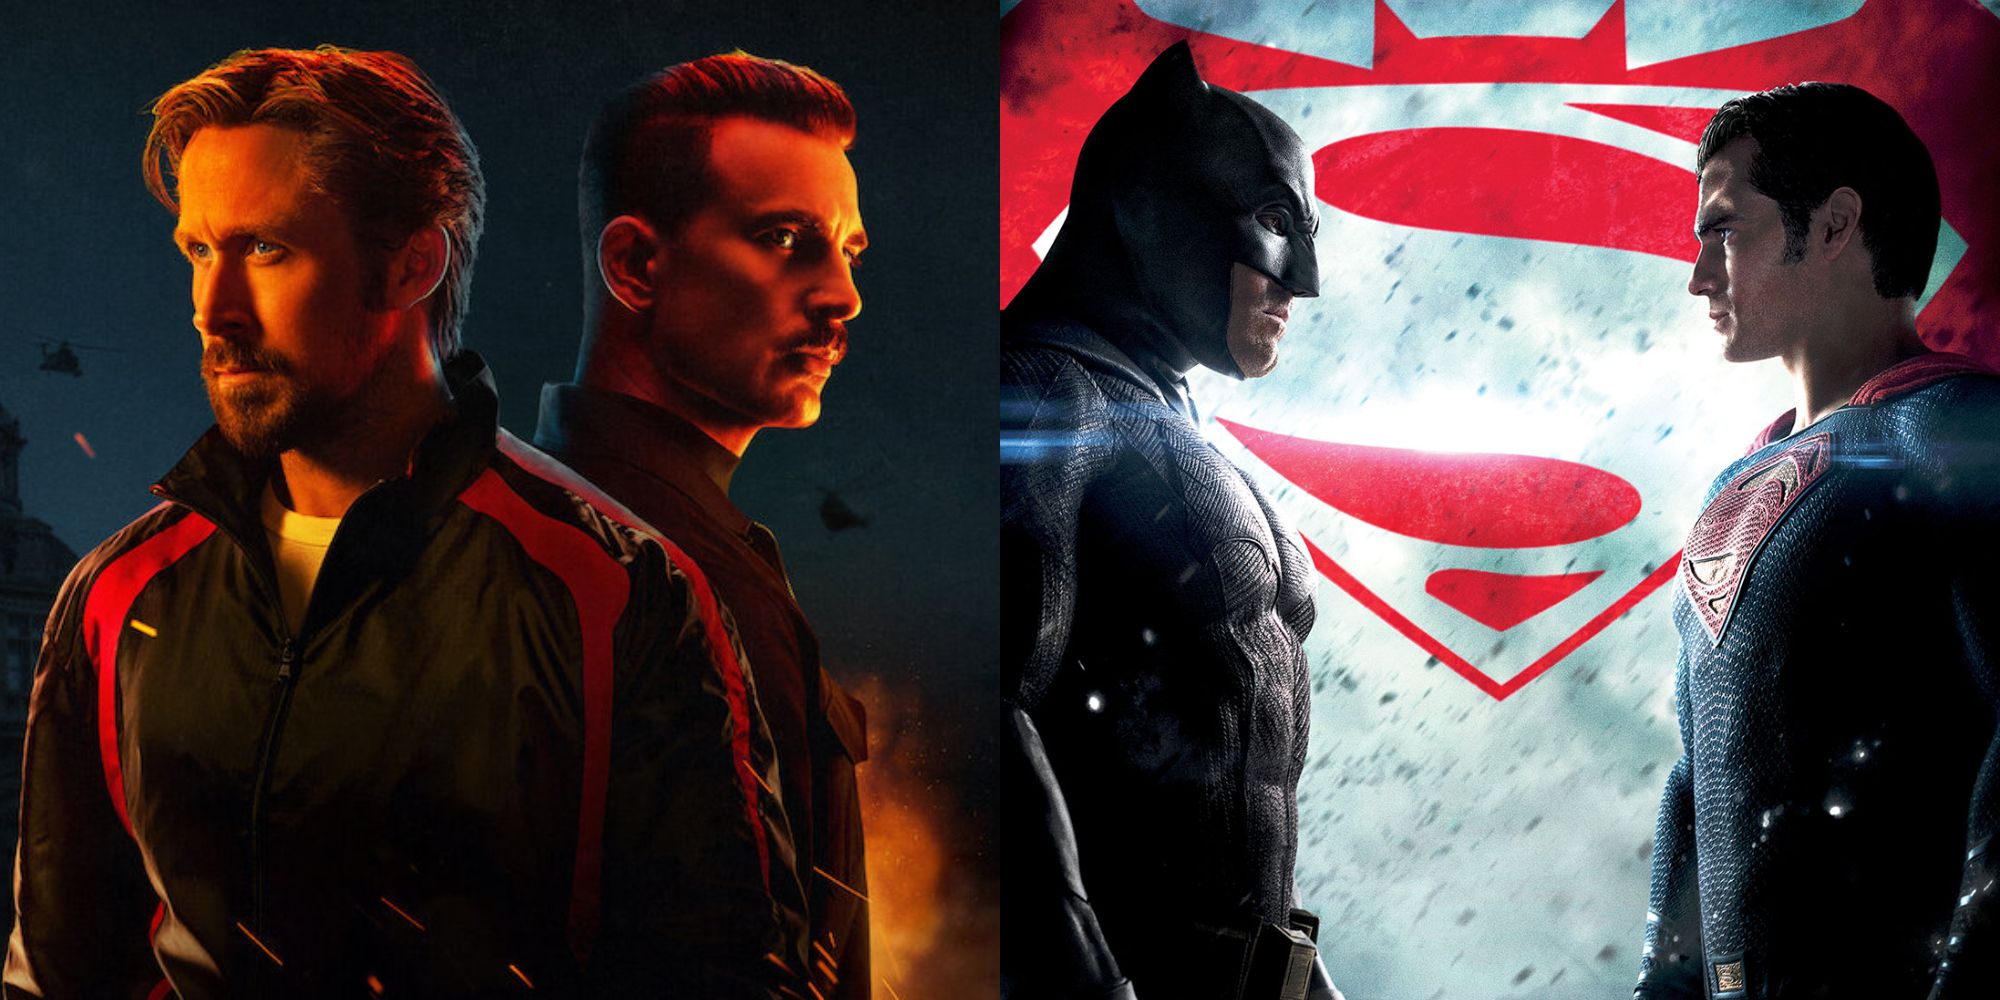 Split image showing the main characters from The Gray Man and Batman v. Superman.